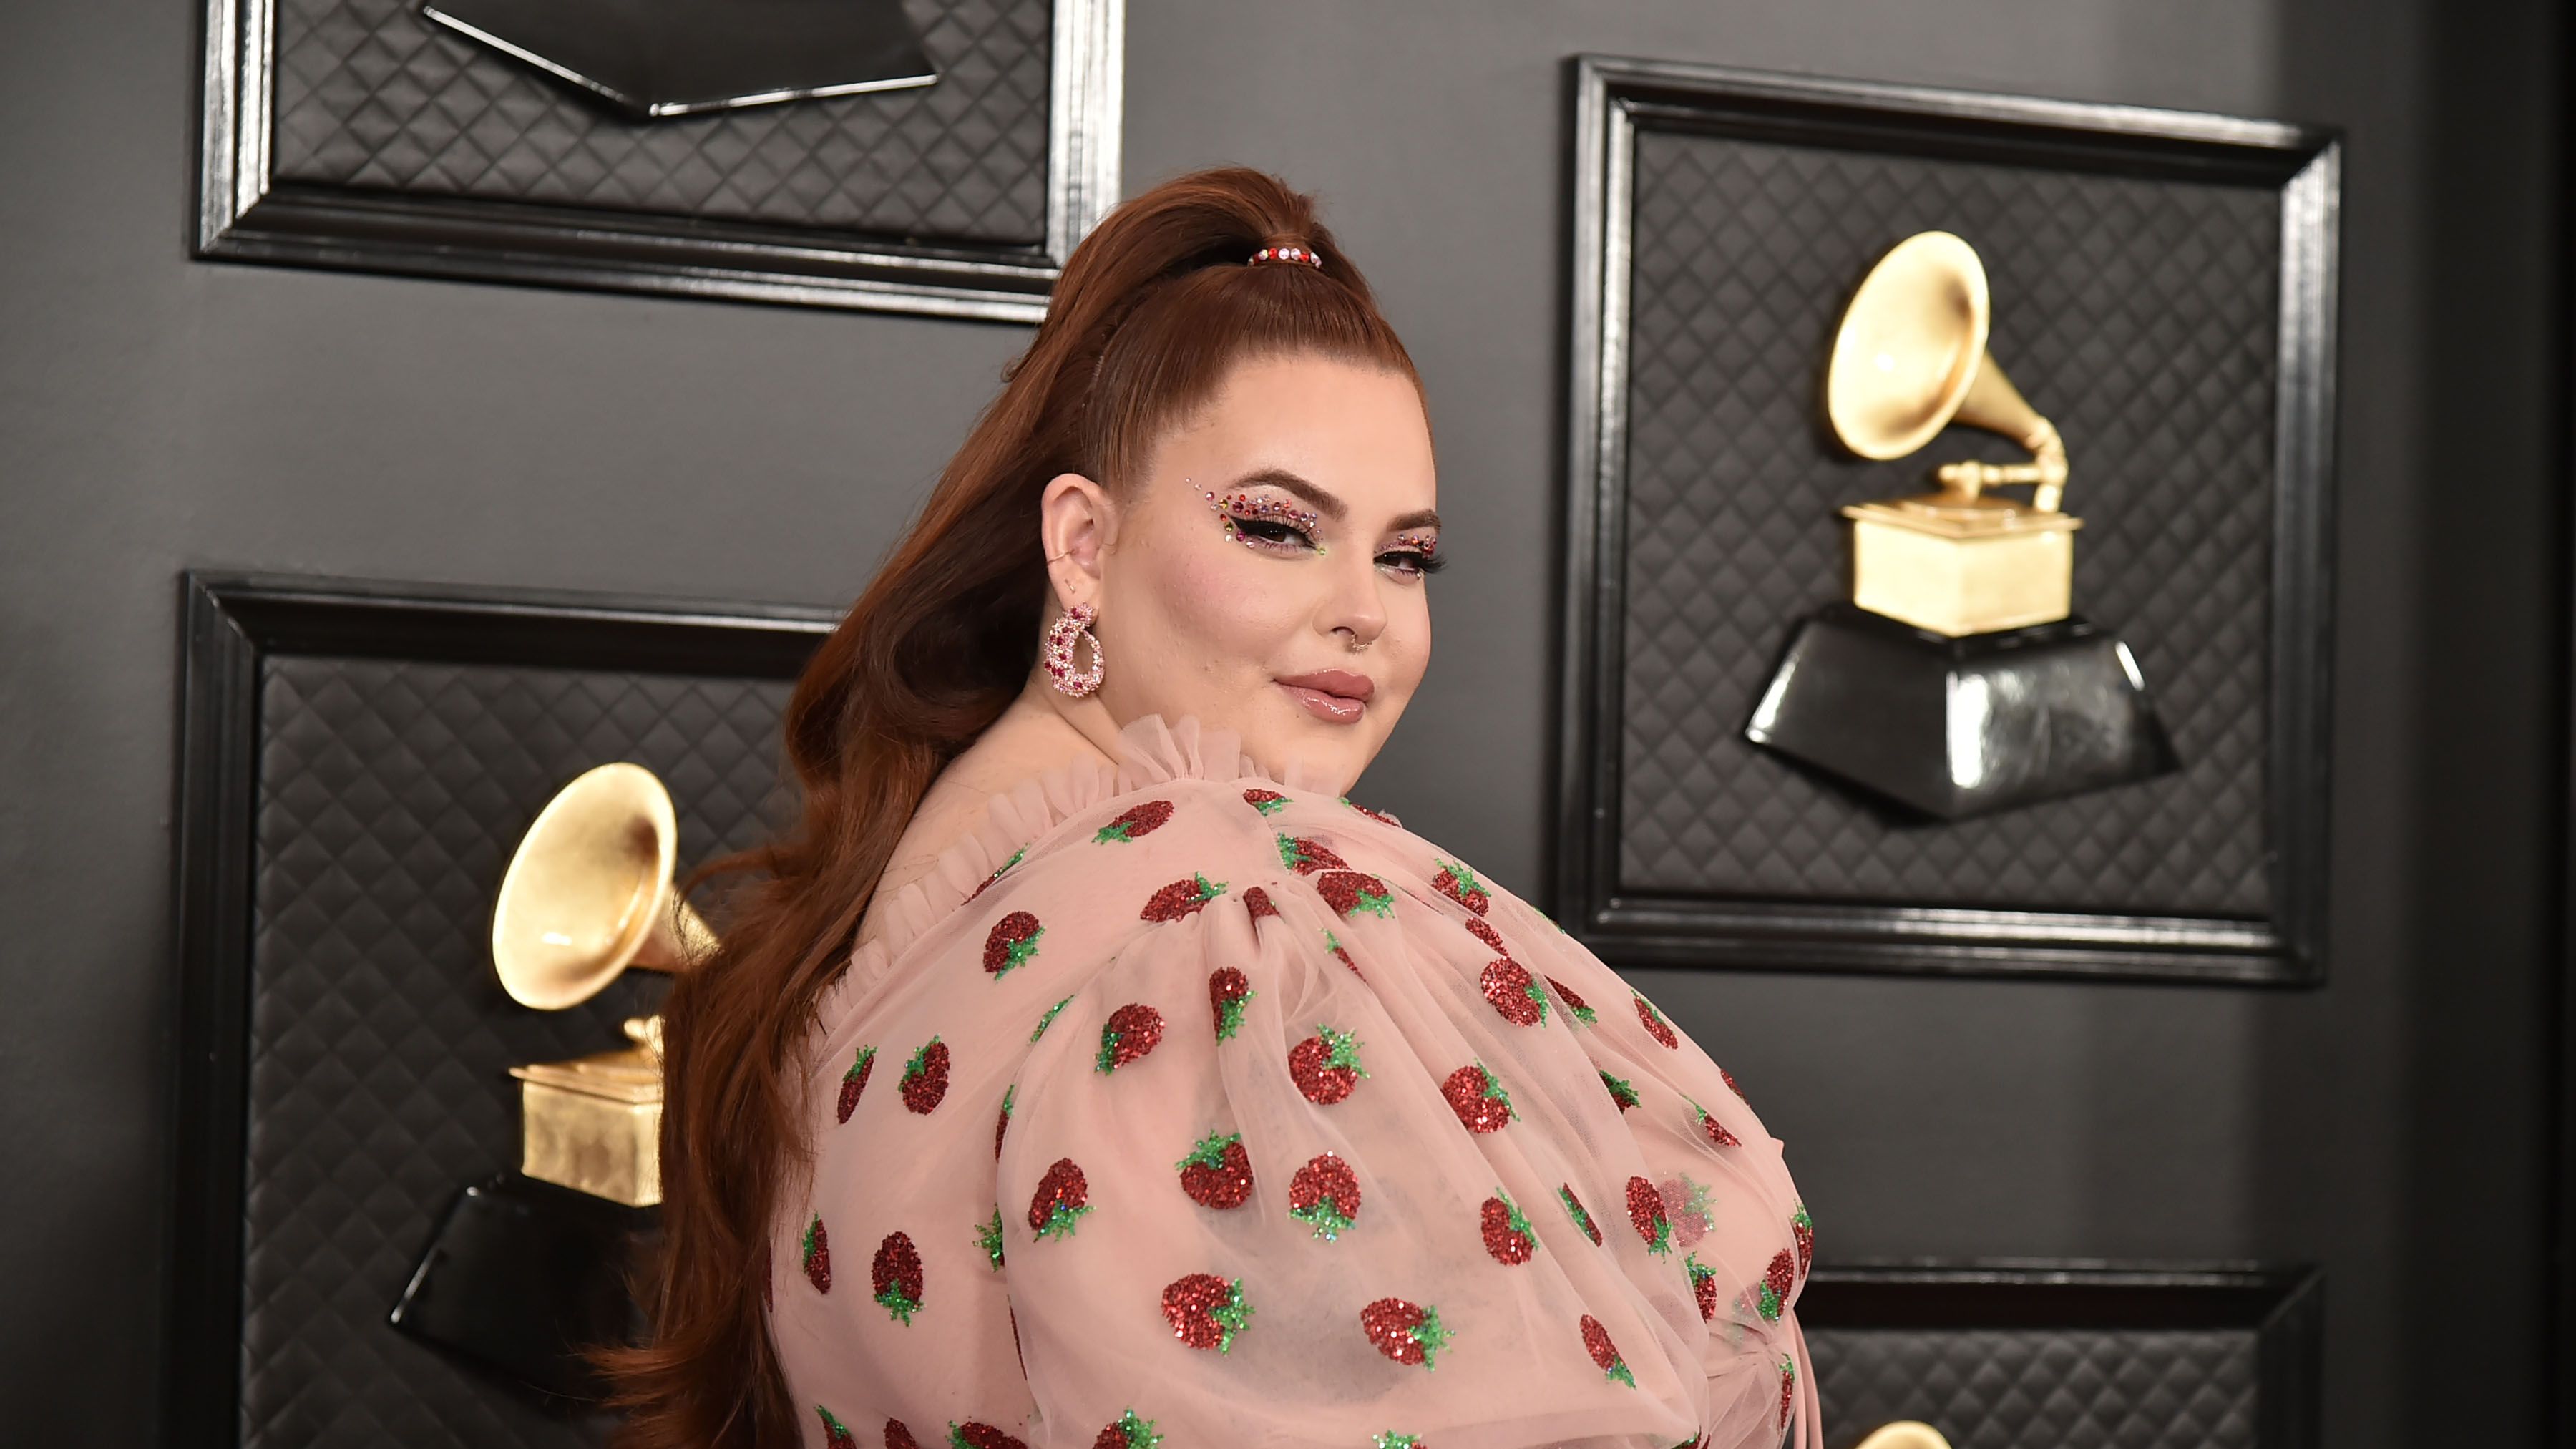 Model Tess Holliday reveals she's recovering from anorexia